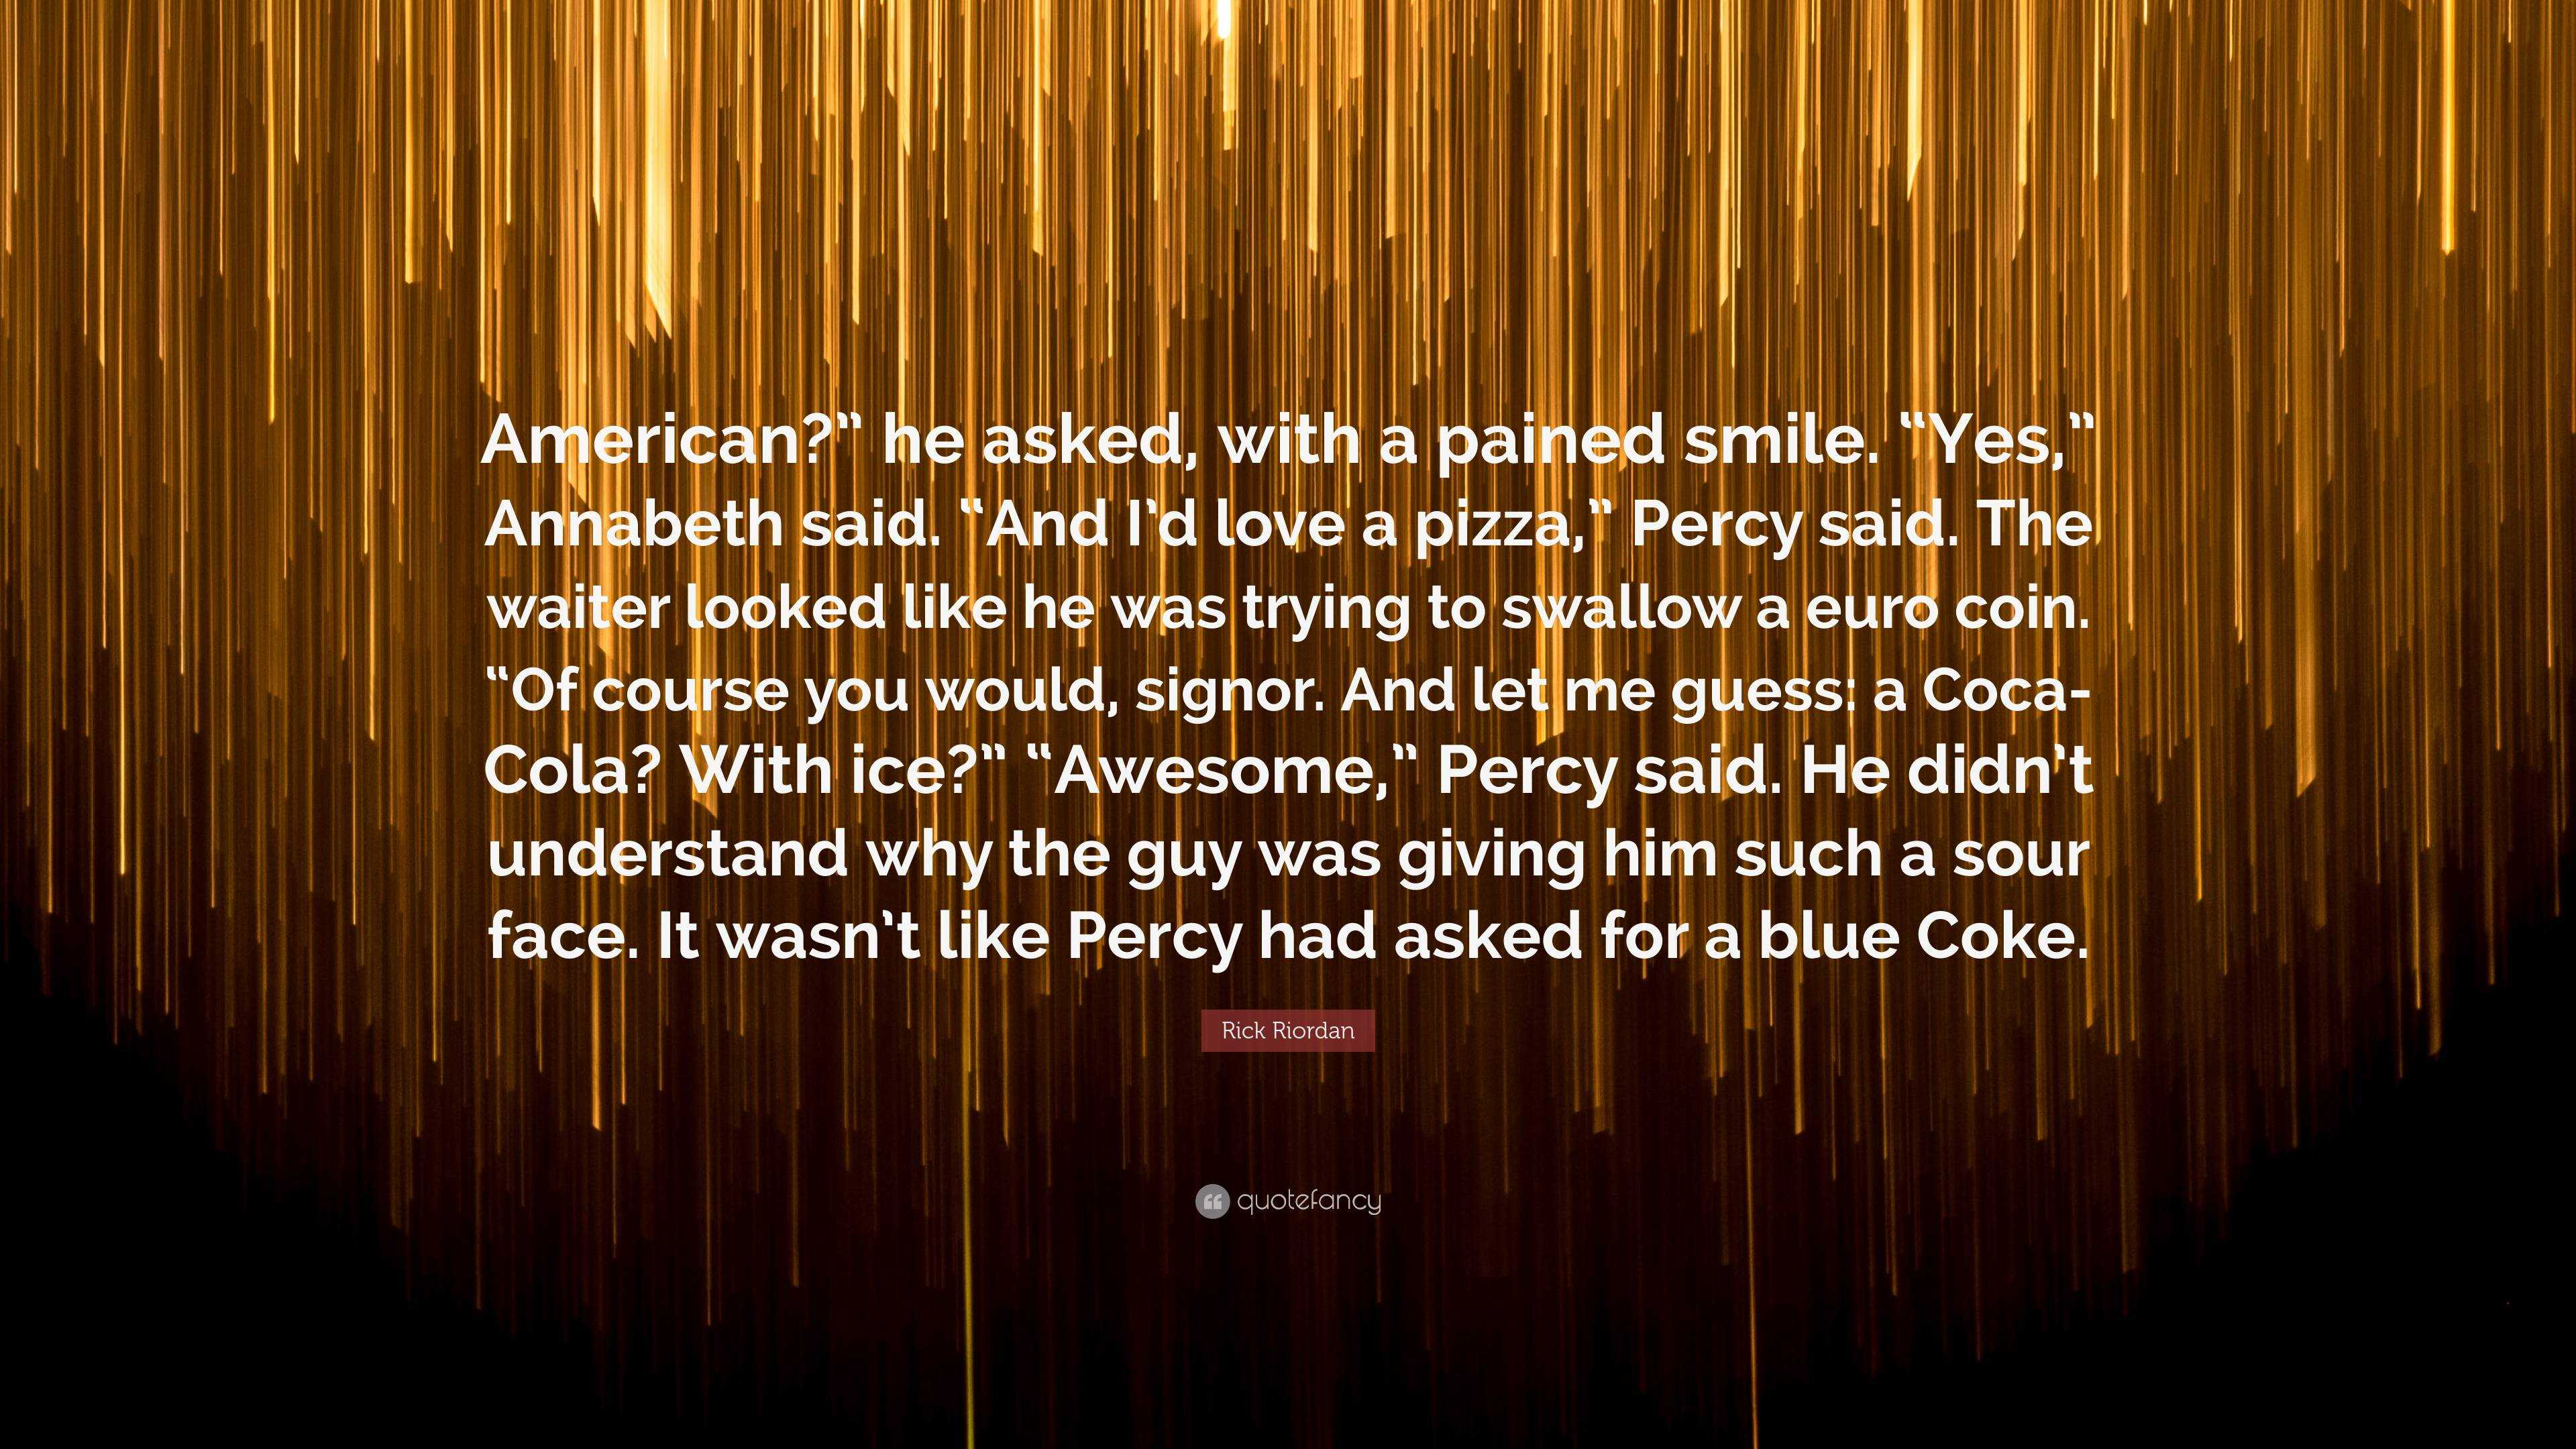 Why Does Percy Ask for a Blue Coke at Dinner? 